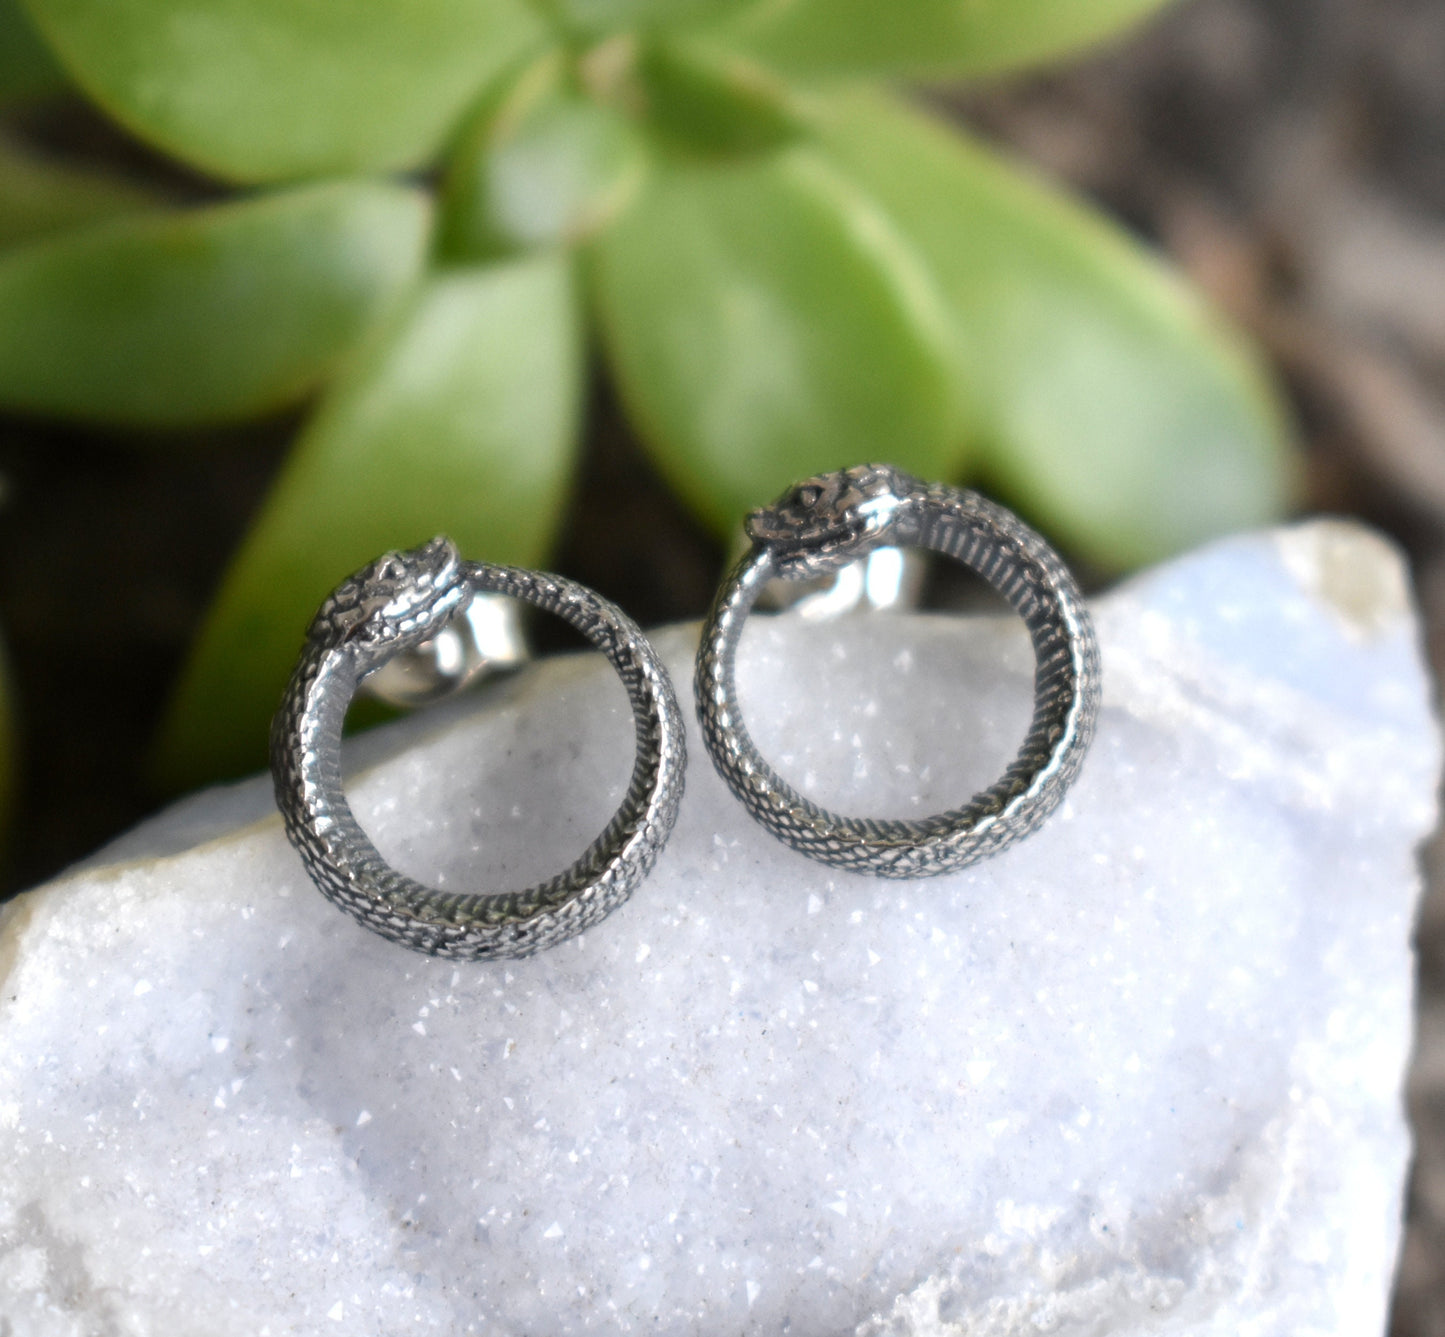 Ouroboros Earrings- Snake Earrings, Snake Jewelry, Snake Medicine-Death And Rebirth